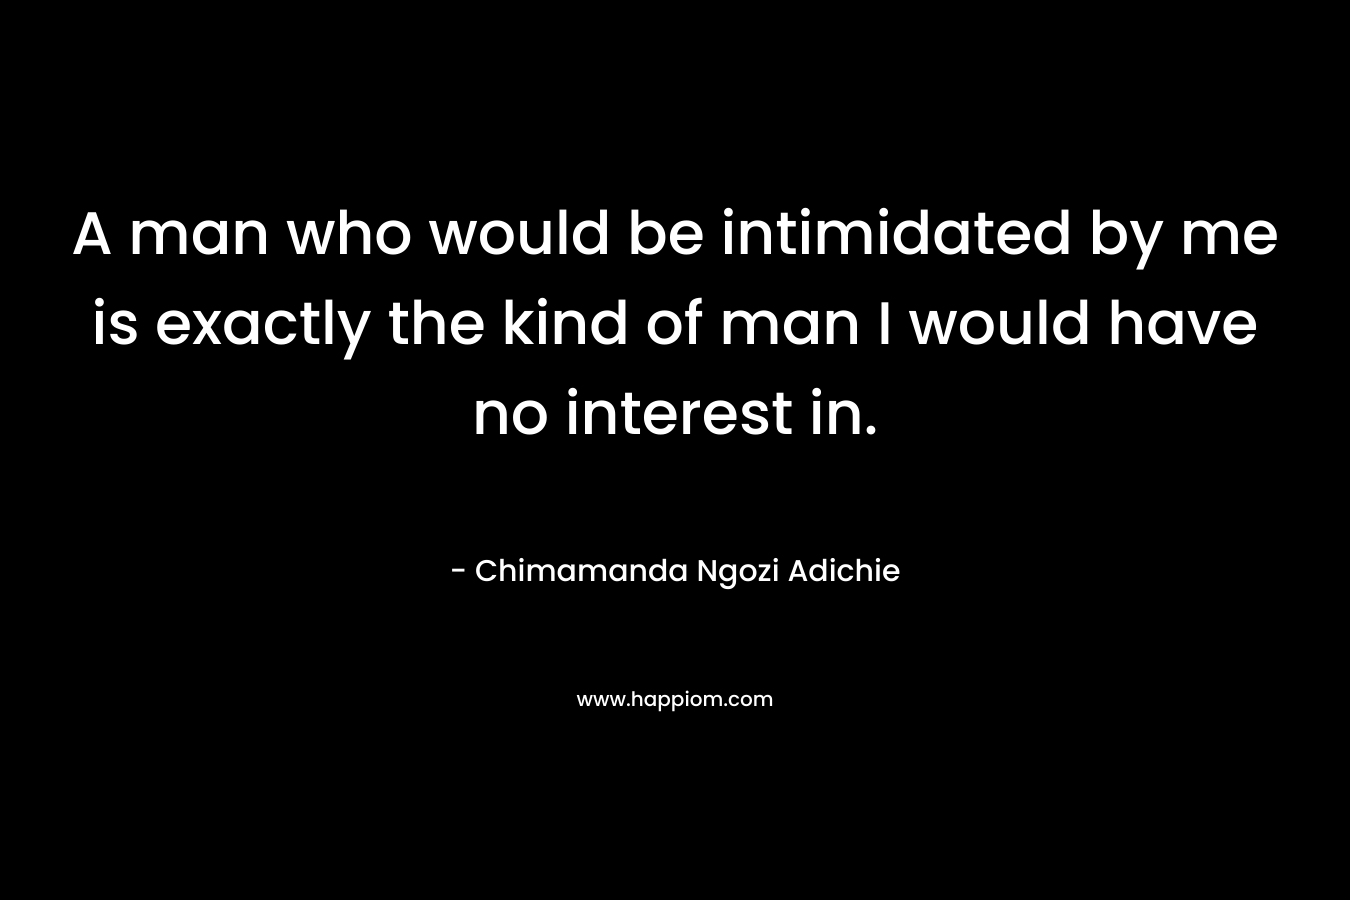 A man who would be intimidated by me is exactly the kind of man I would have no interest in. – Chimamanda Ngozi Adichie